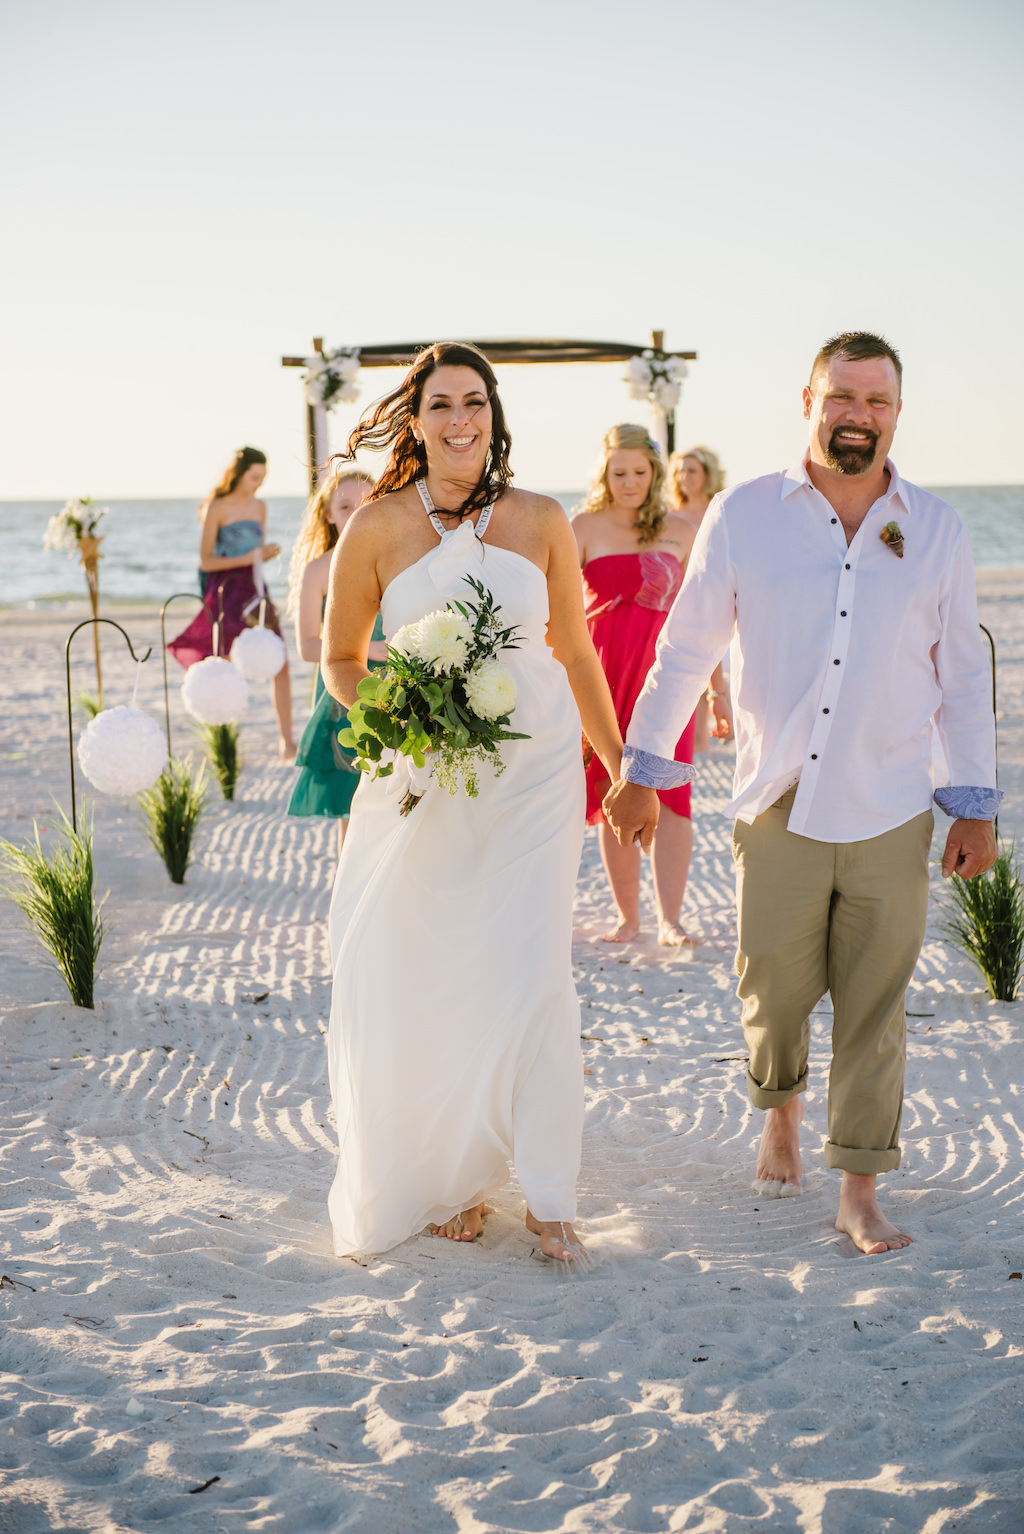 Simple Intimate Beach Wedding Ceremony Portrait with White Pomander Balls on Iron Hook with Greenery, Wooden Arch with White Flowers and Draping, and Tiki Torches, Bridesmaids in Mismatched Bright Colored Tropical Dresses, Bride in Halter DaVinci Dress | Tampa Bay Wedding Planner Gulf Beach Weddings | Treasure Island Venue Sunset Vista Condo Hotel Resort 